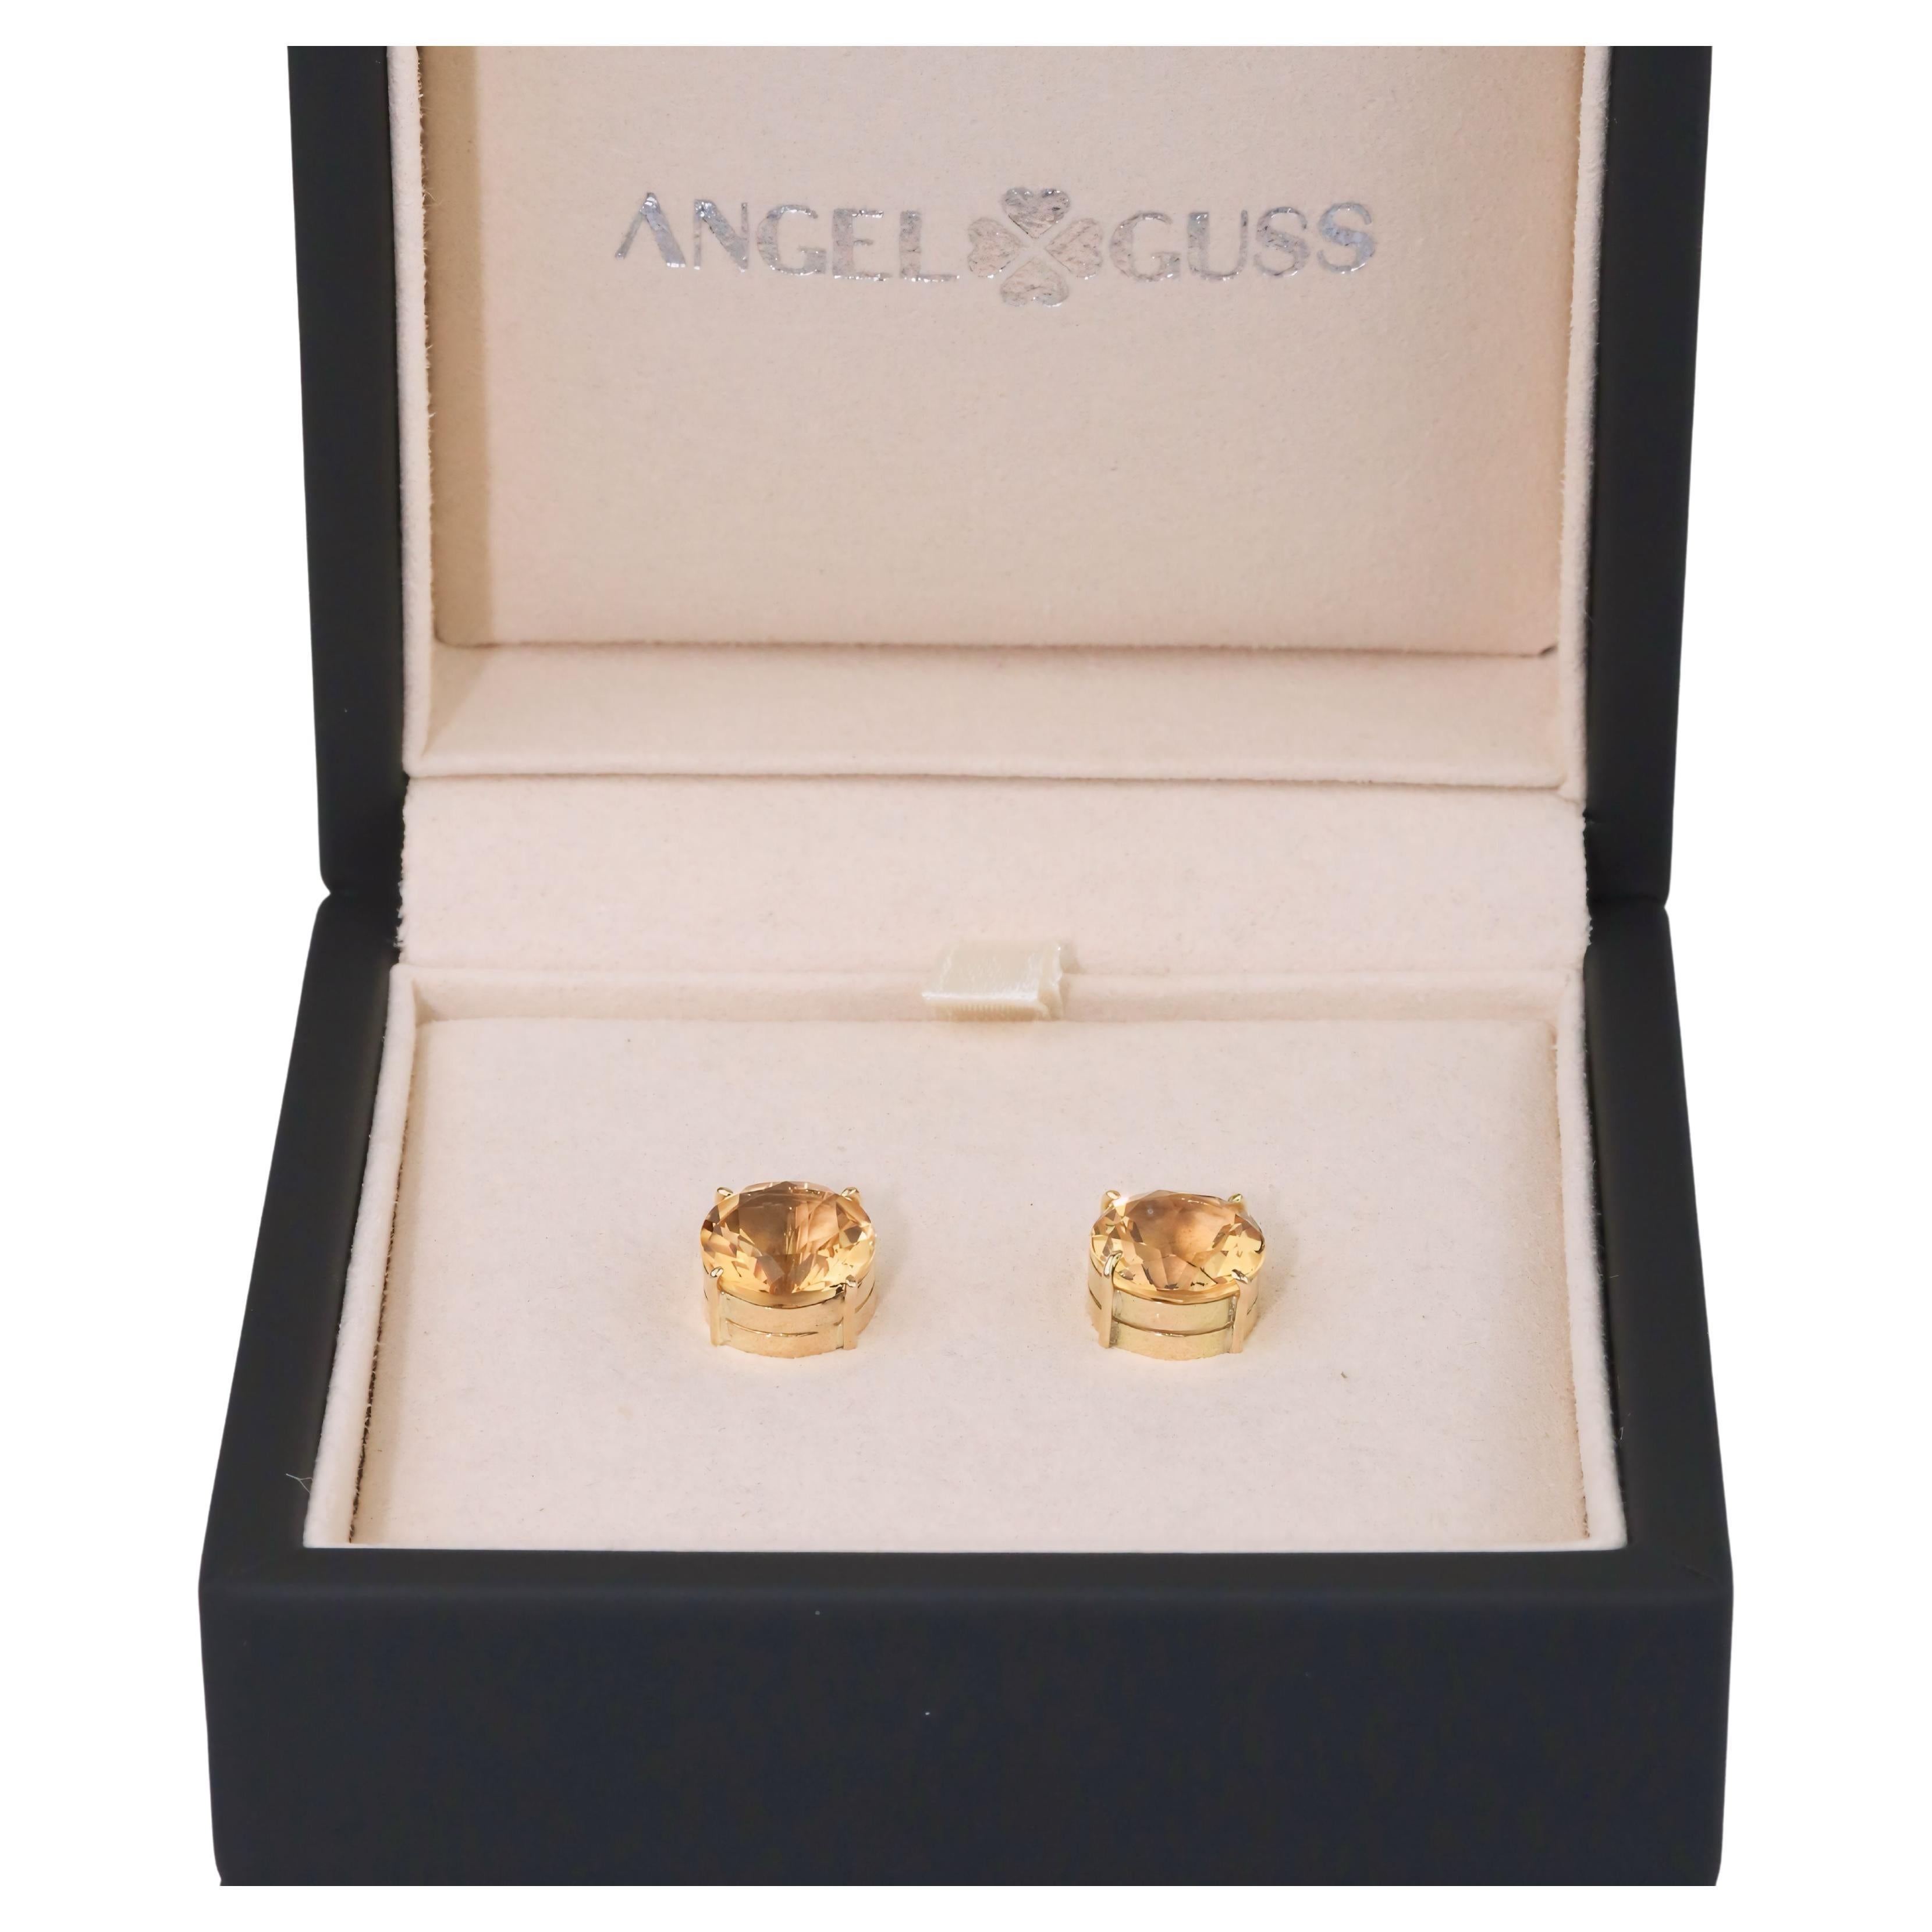 Citrine Earrings - 18K Solid Yellow Gold